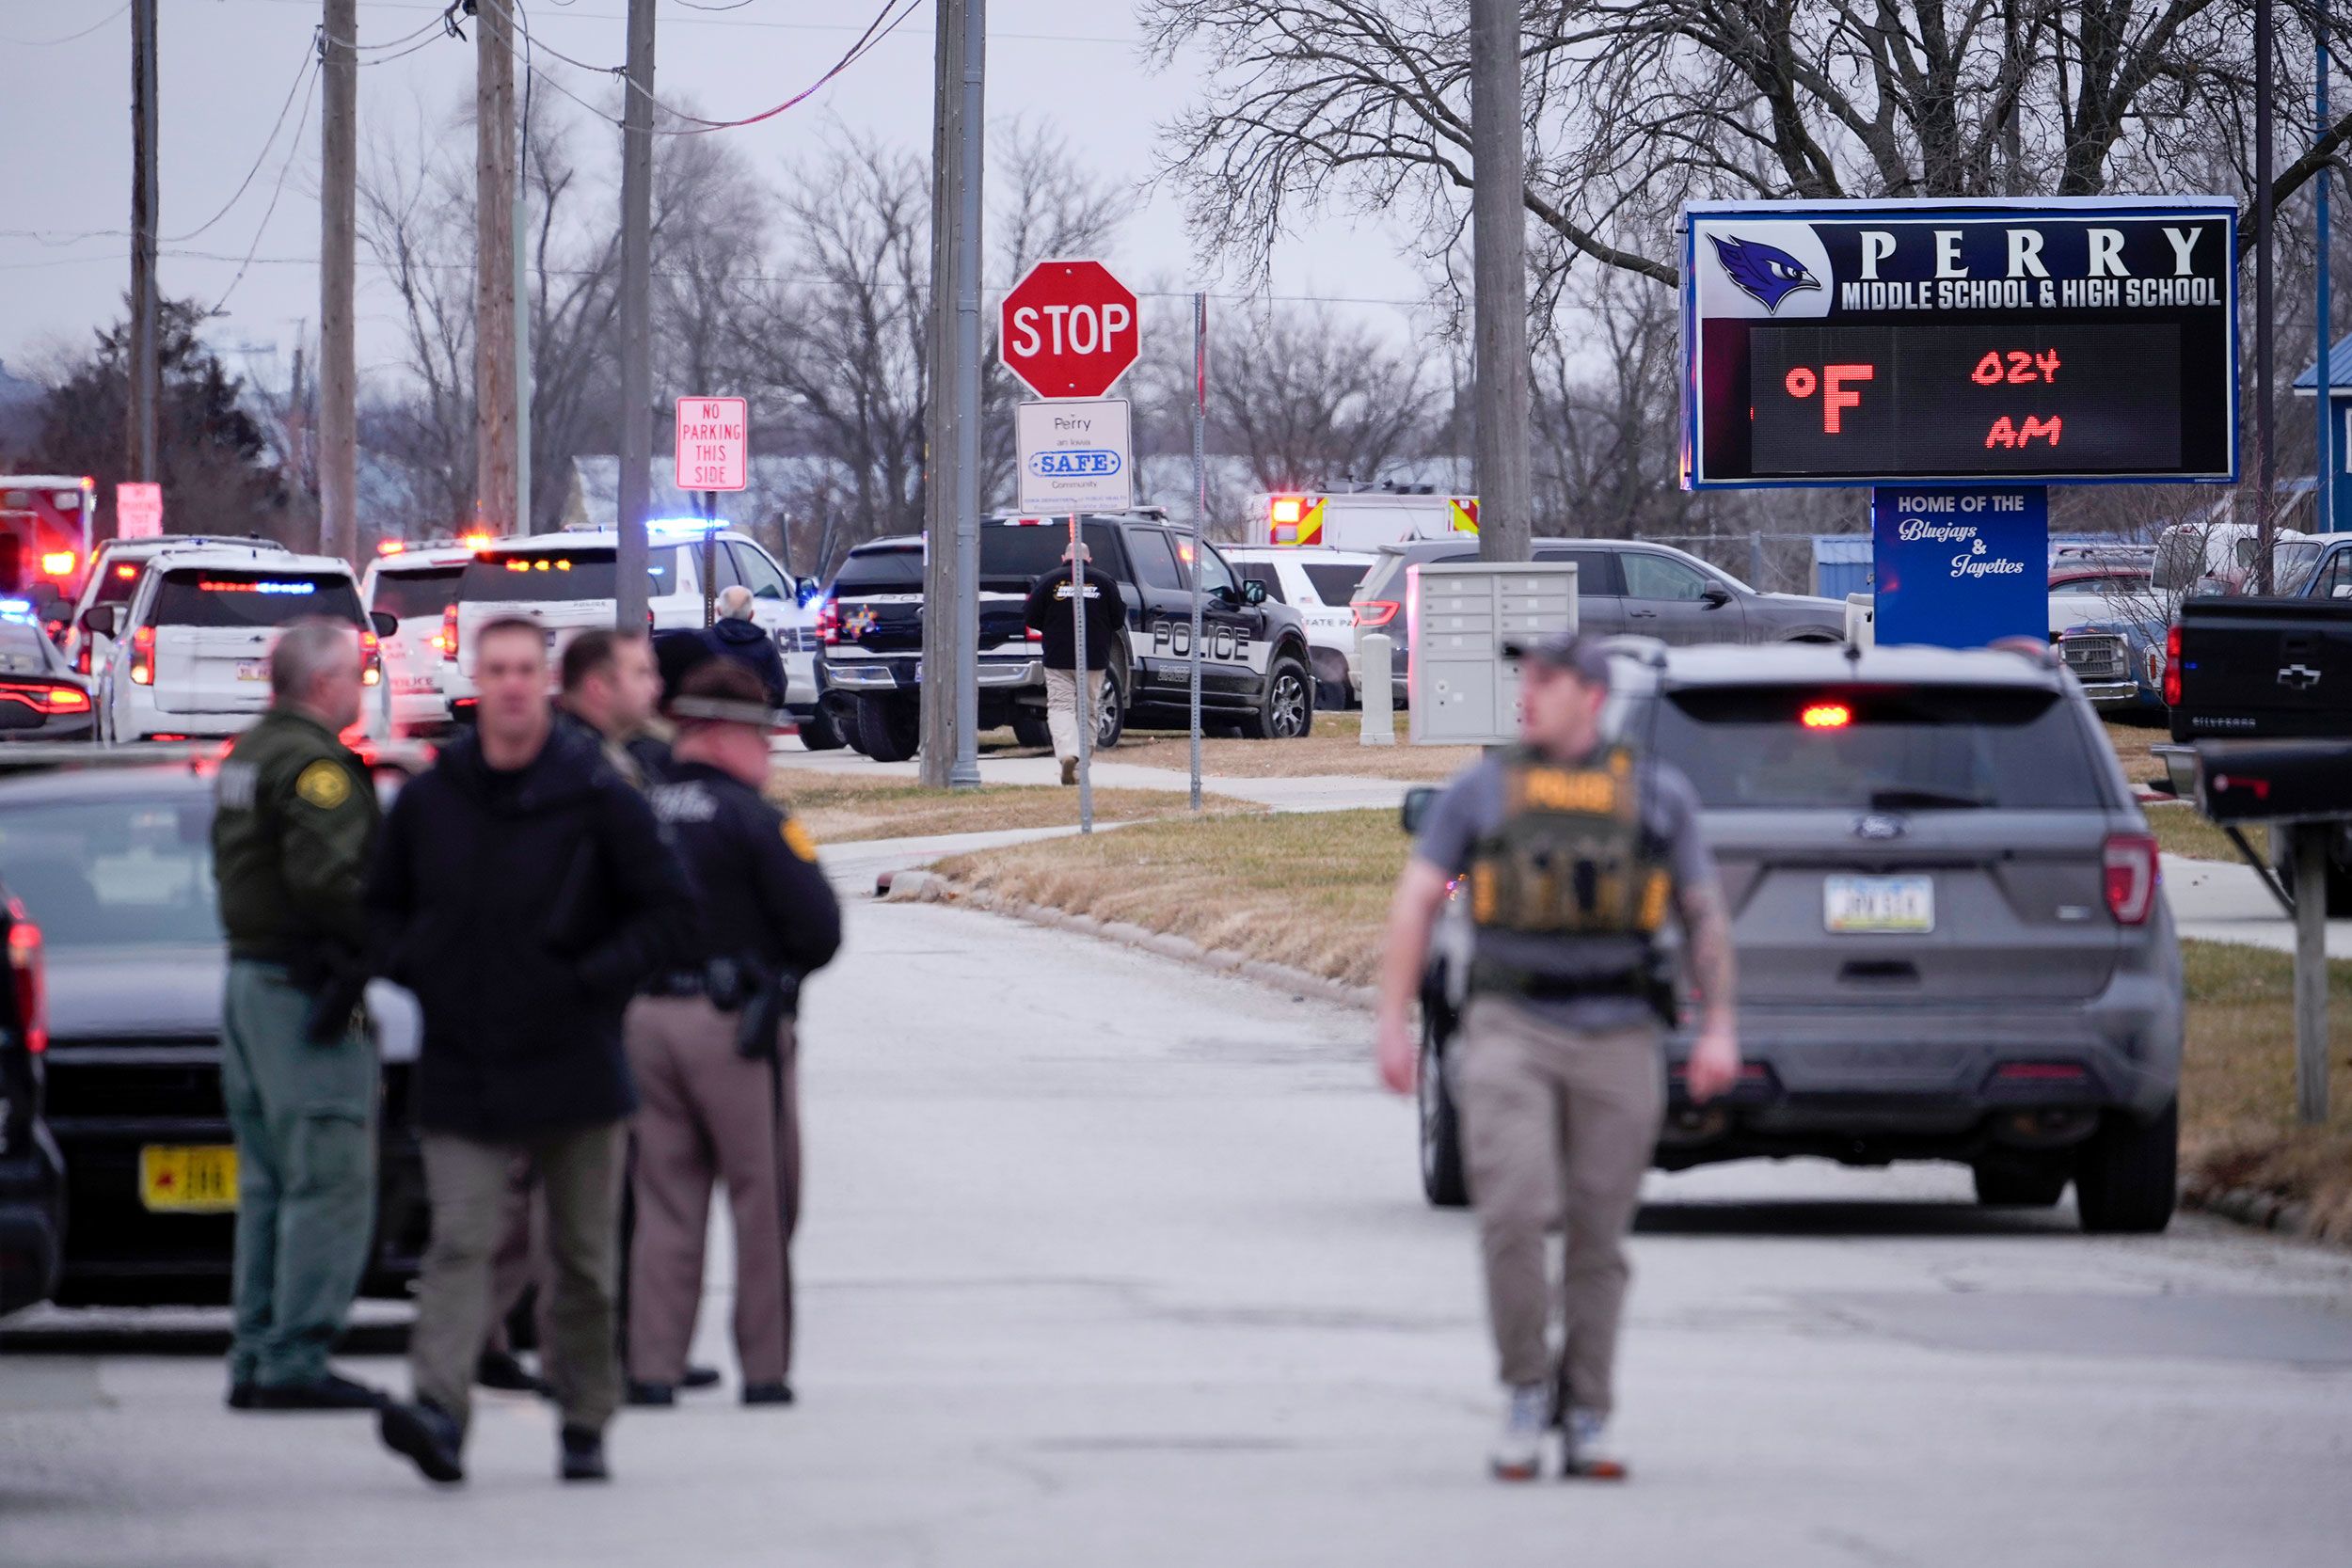 Iowa school shooter is believed to have posted an ominous TikTok video before killing a 6th grader and wounding 7 people | CNN